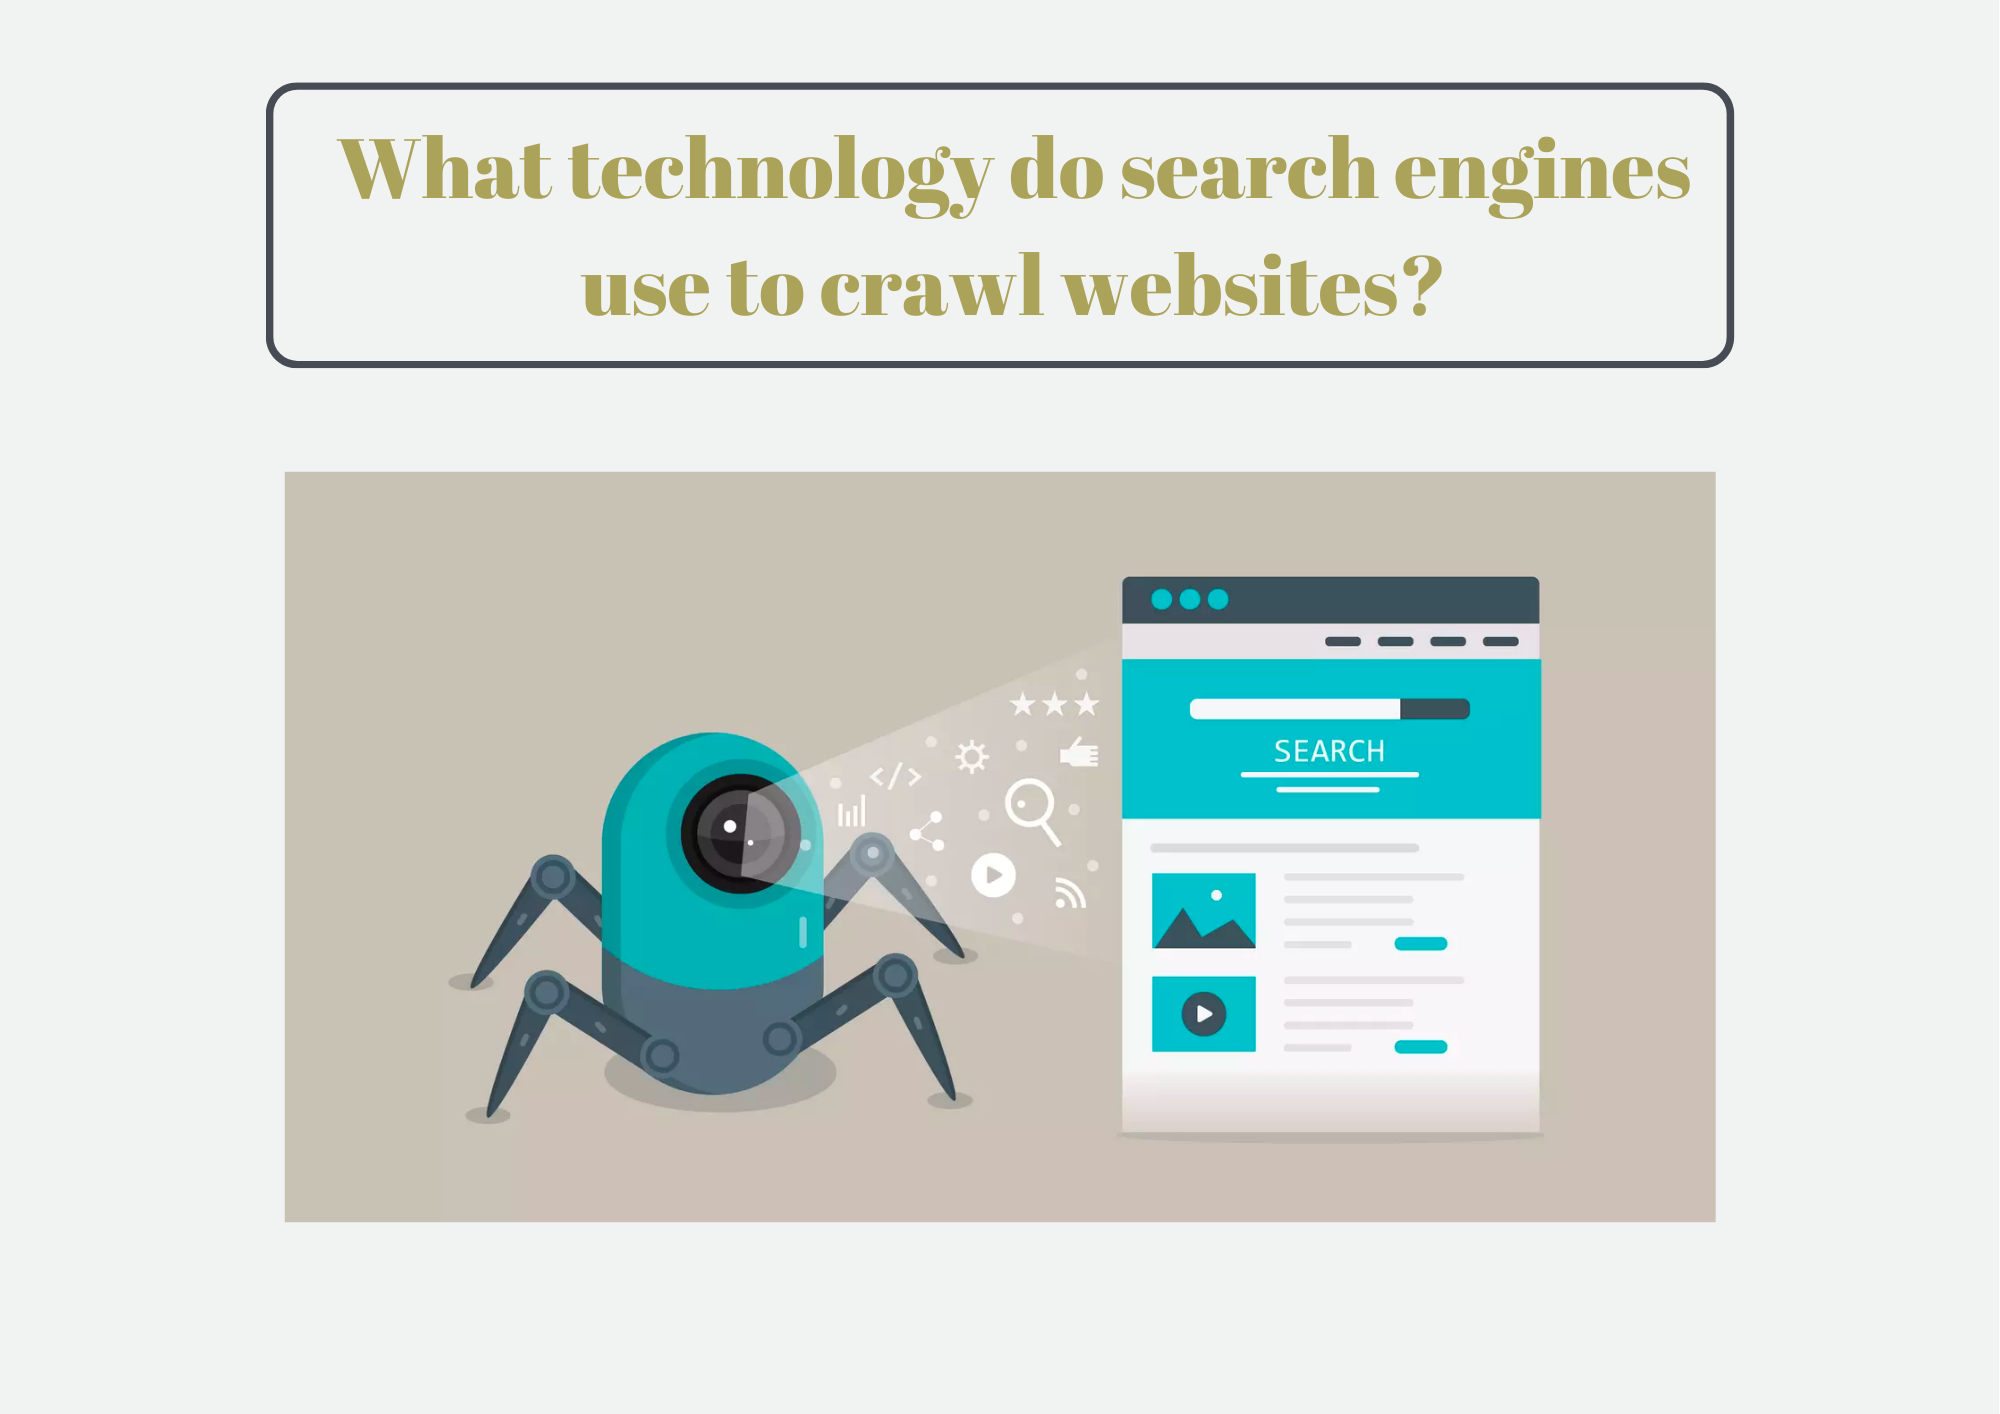 What technology do search engines use to crawl websites